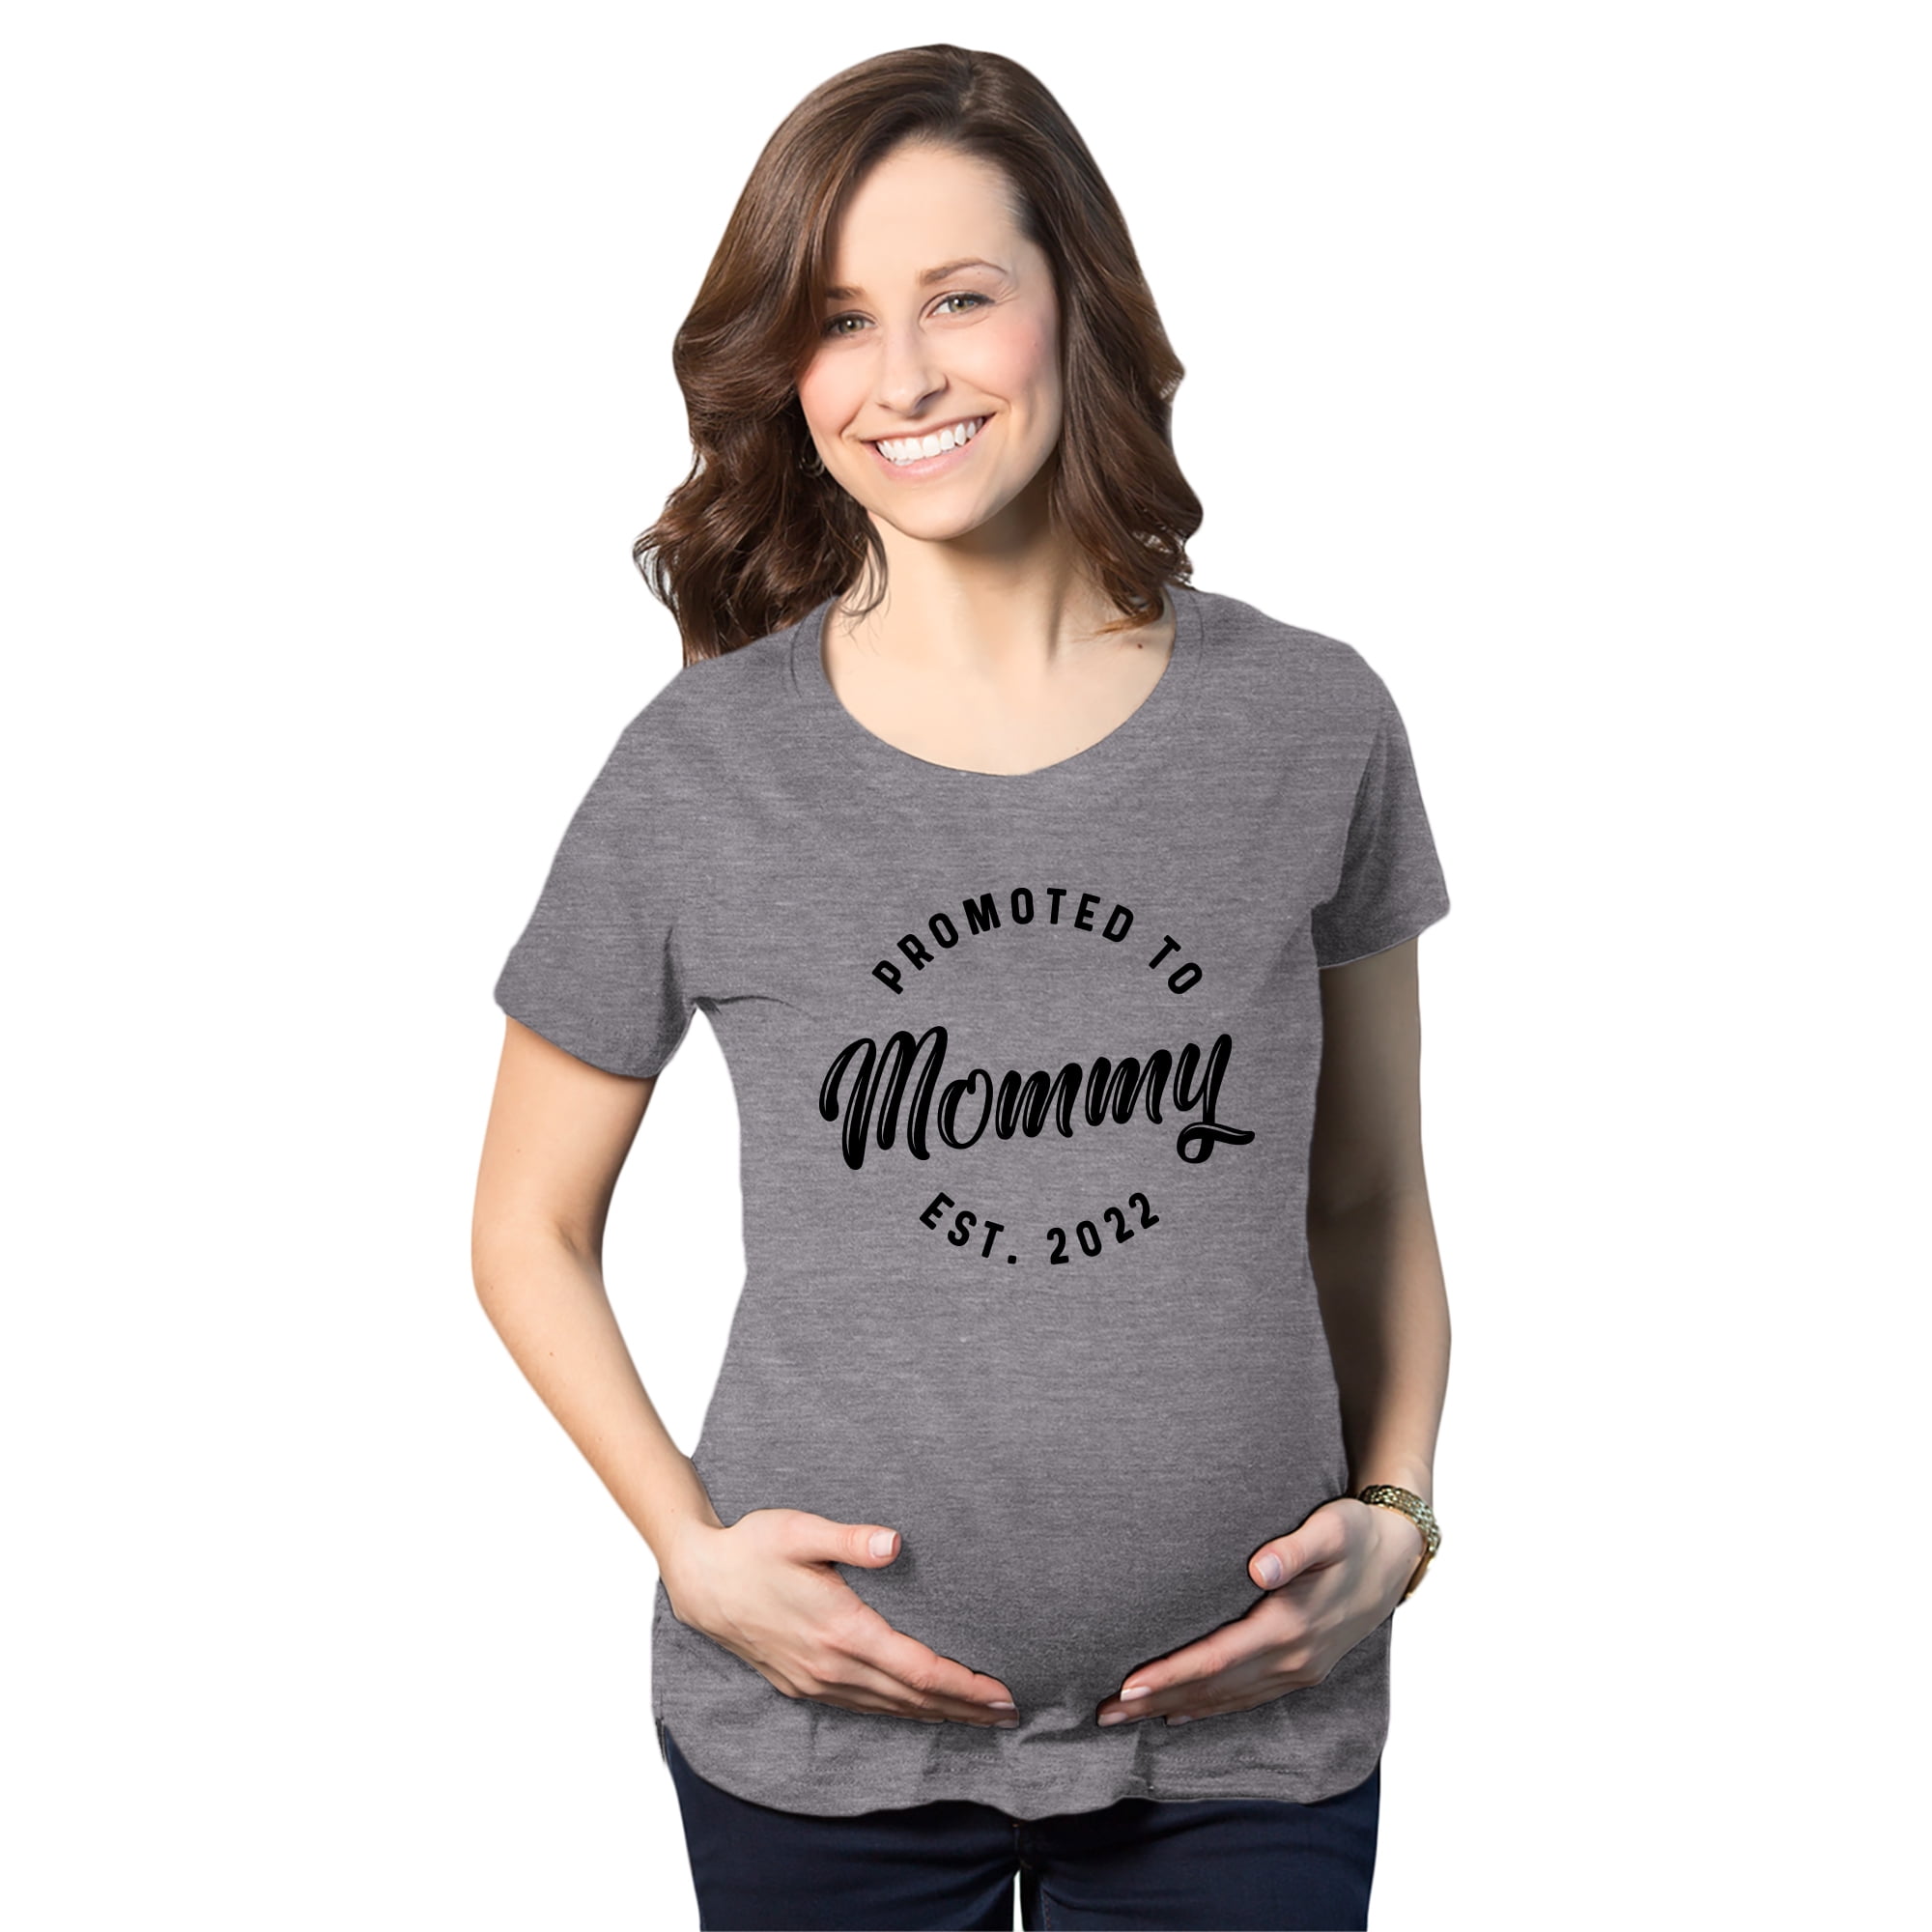 Baby shower gifts Pregnancy announcement shirt Mama shirt Expecting t shirt New mom tshirt Pregnancy reveal shirts Mom to be shirts